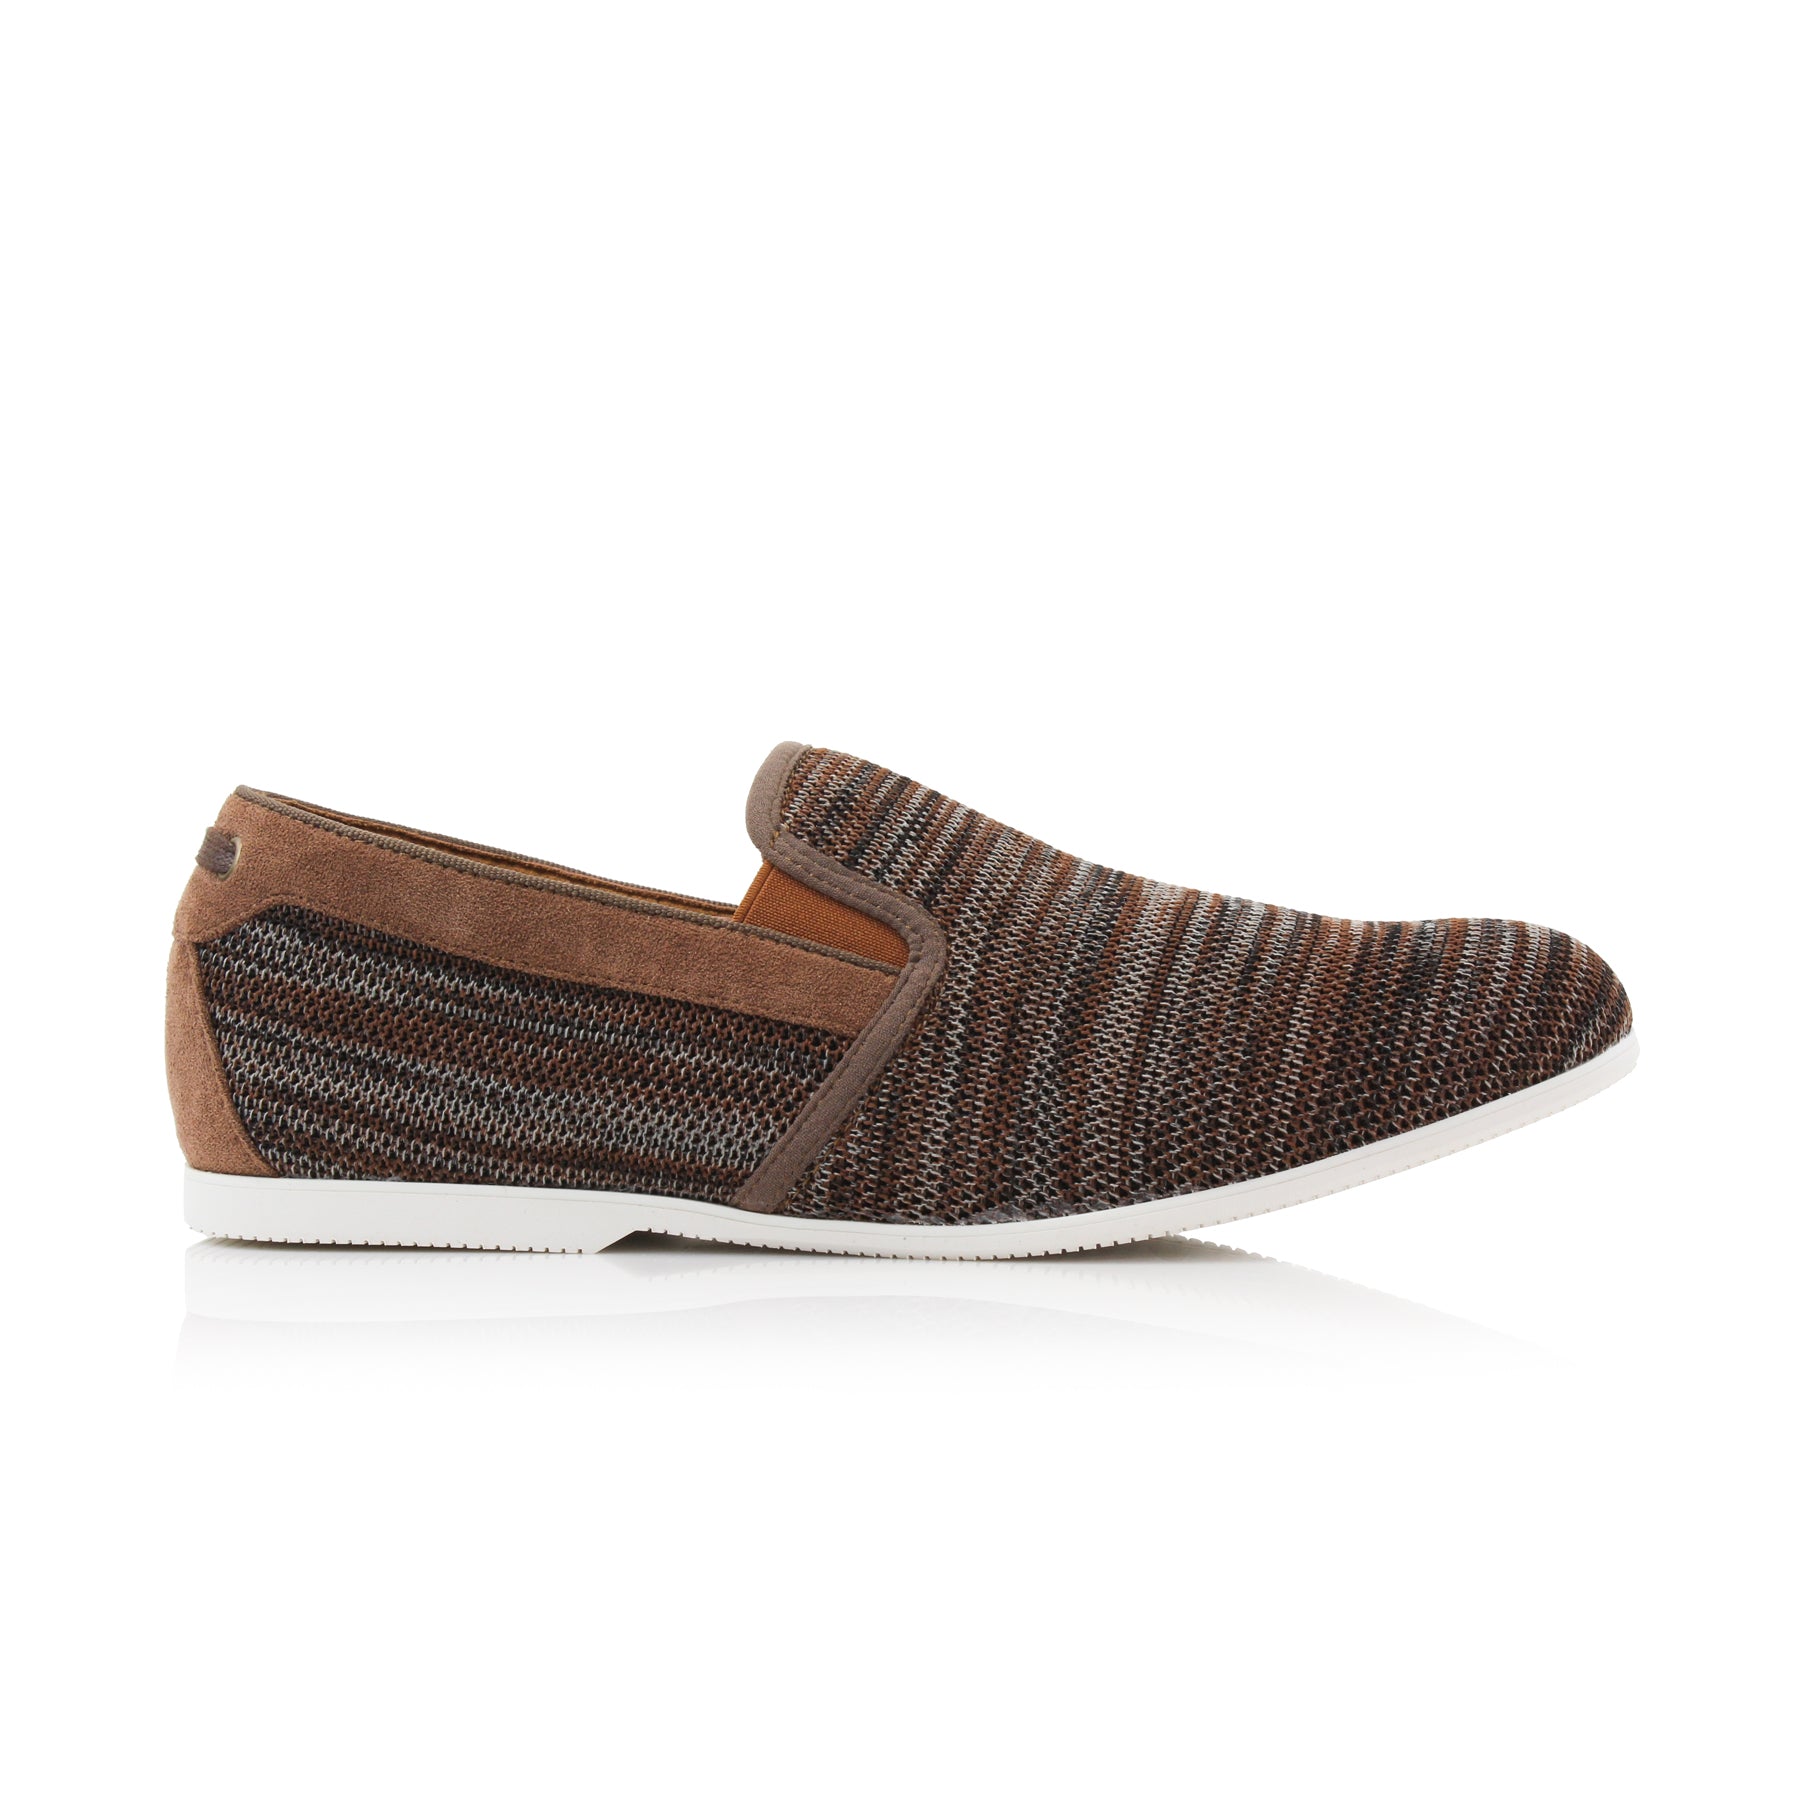 Knitted Loafers | Jiro by Ferro Aldo | Conal Footwear | Outer Side Angle View